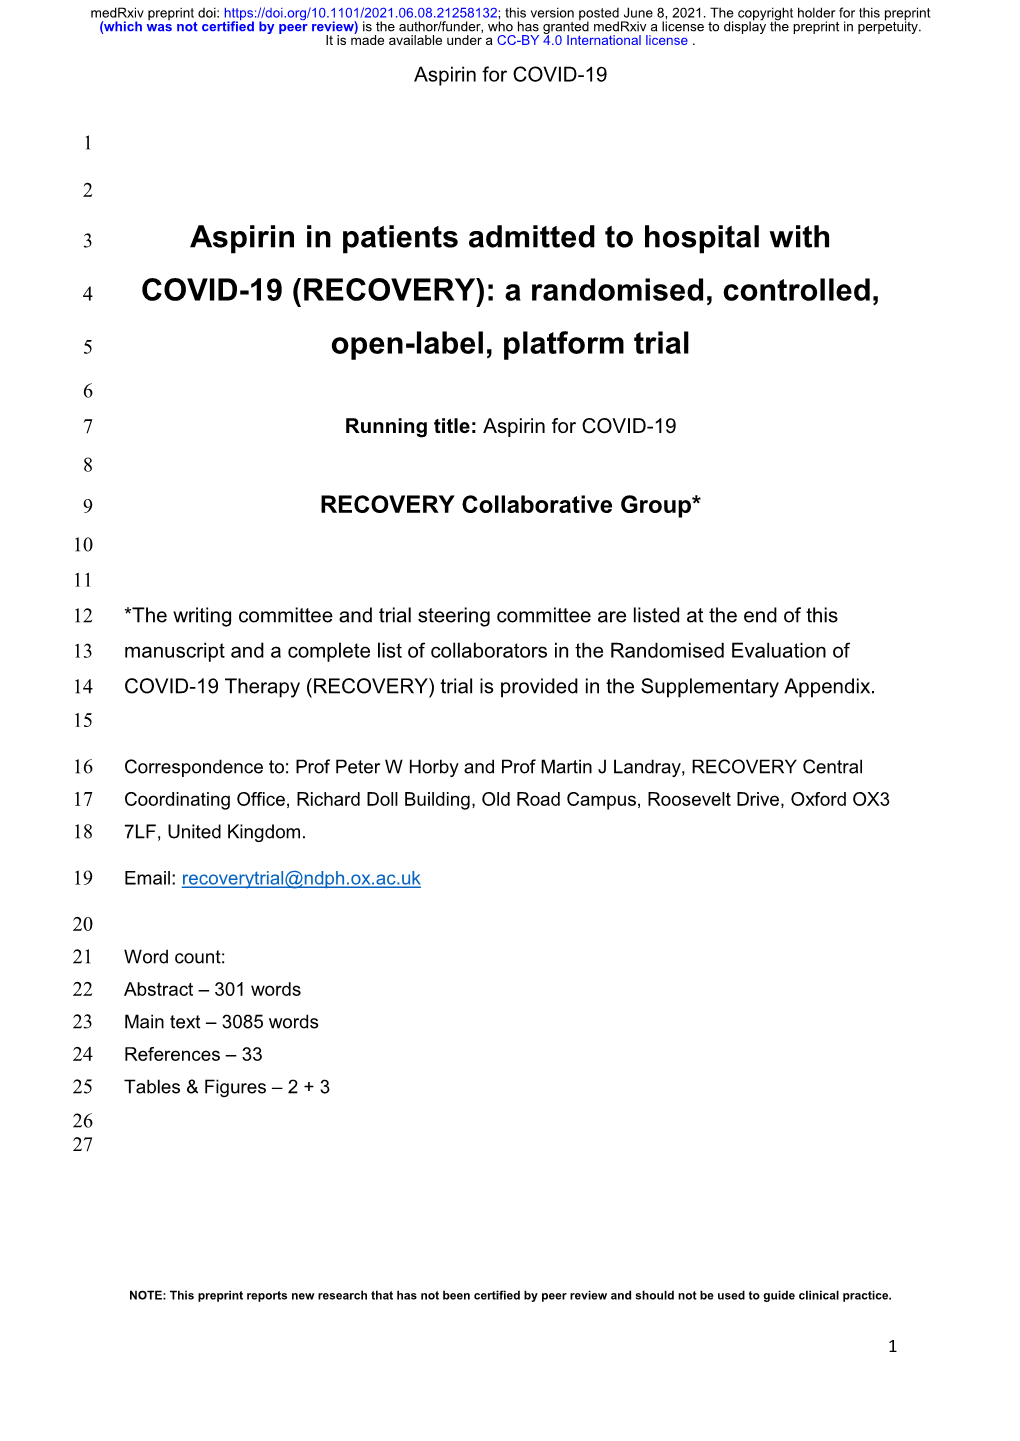 Aspirin in Patients Admitted to Hospital with COVID-19 (RECOVERY): a Randomised, Controlled, Open-Label, Platform Trial